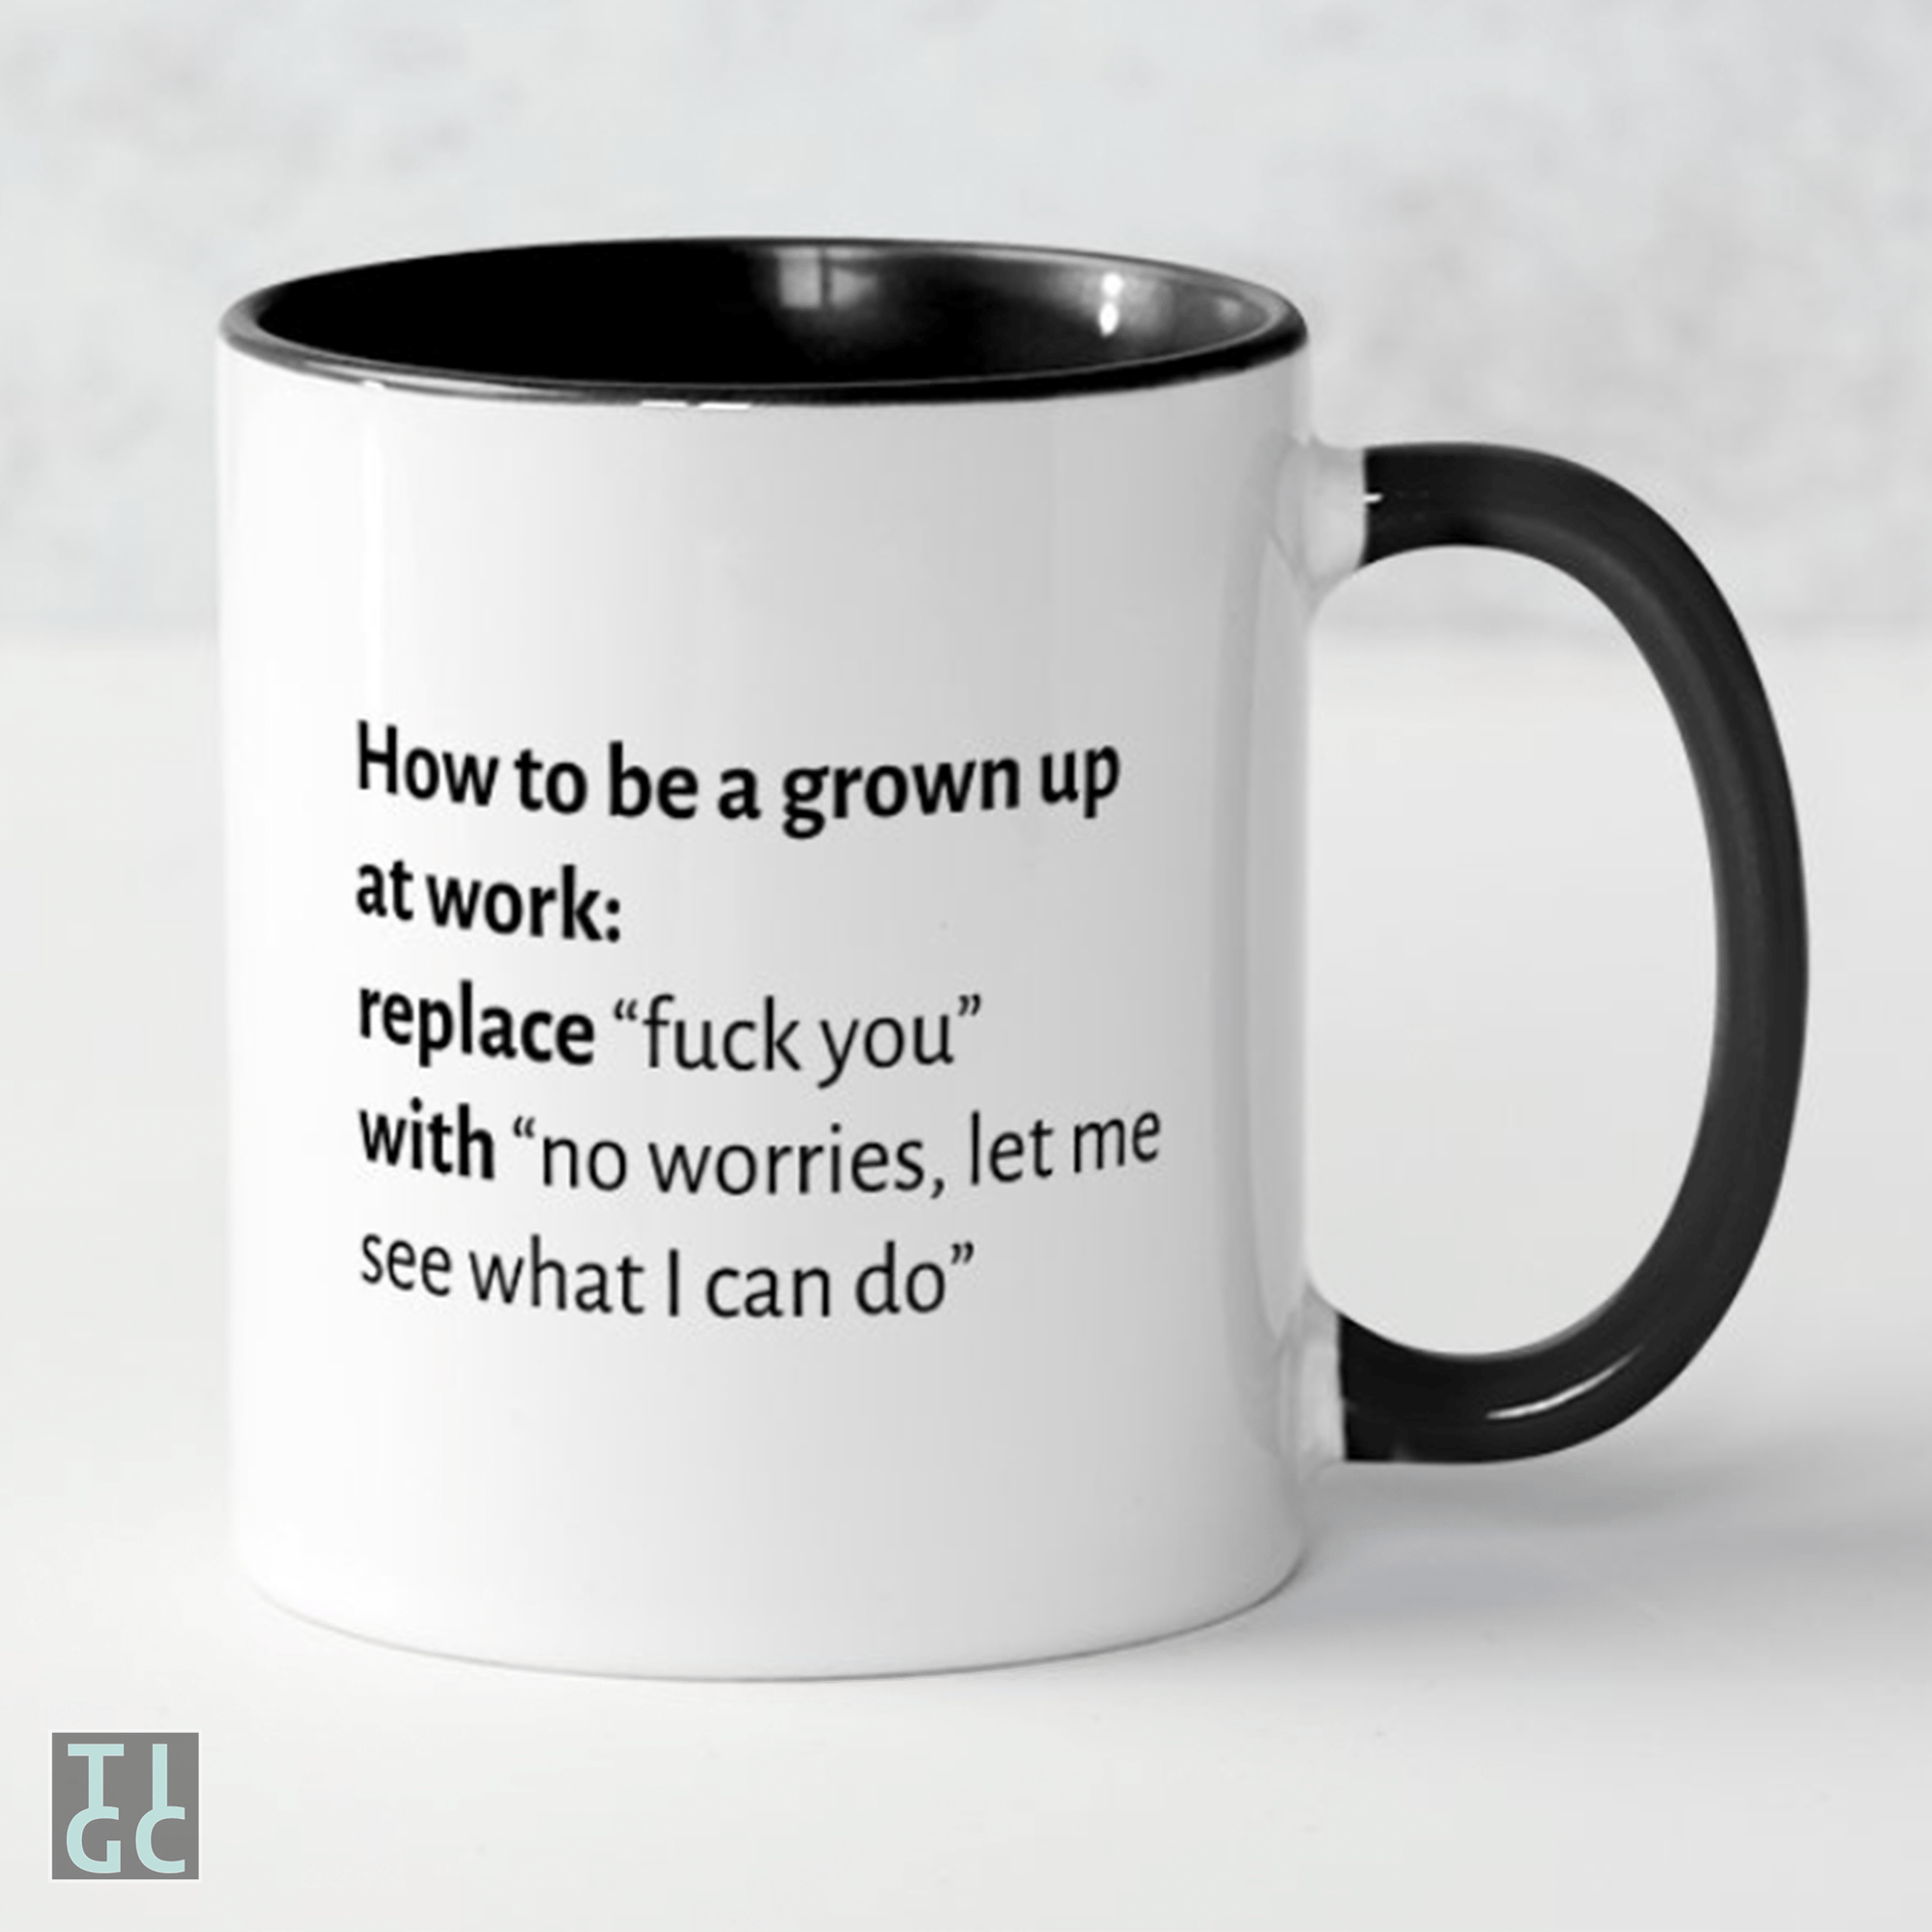 TIGC The Inappropriate Gift Co How to be a Grown up at Work Mug